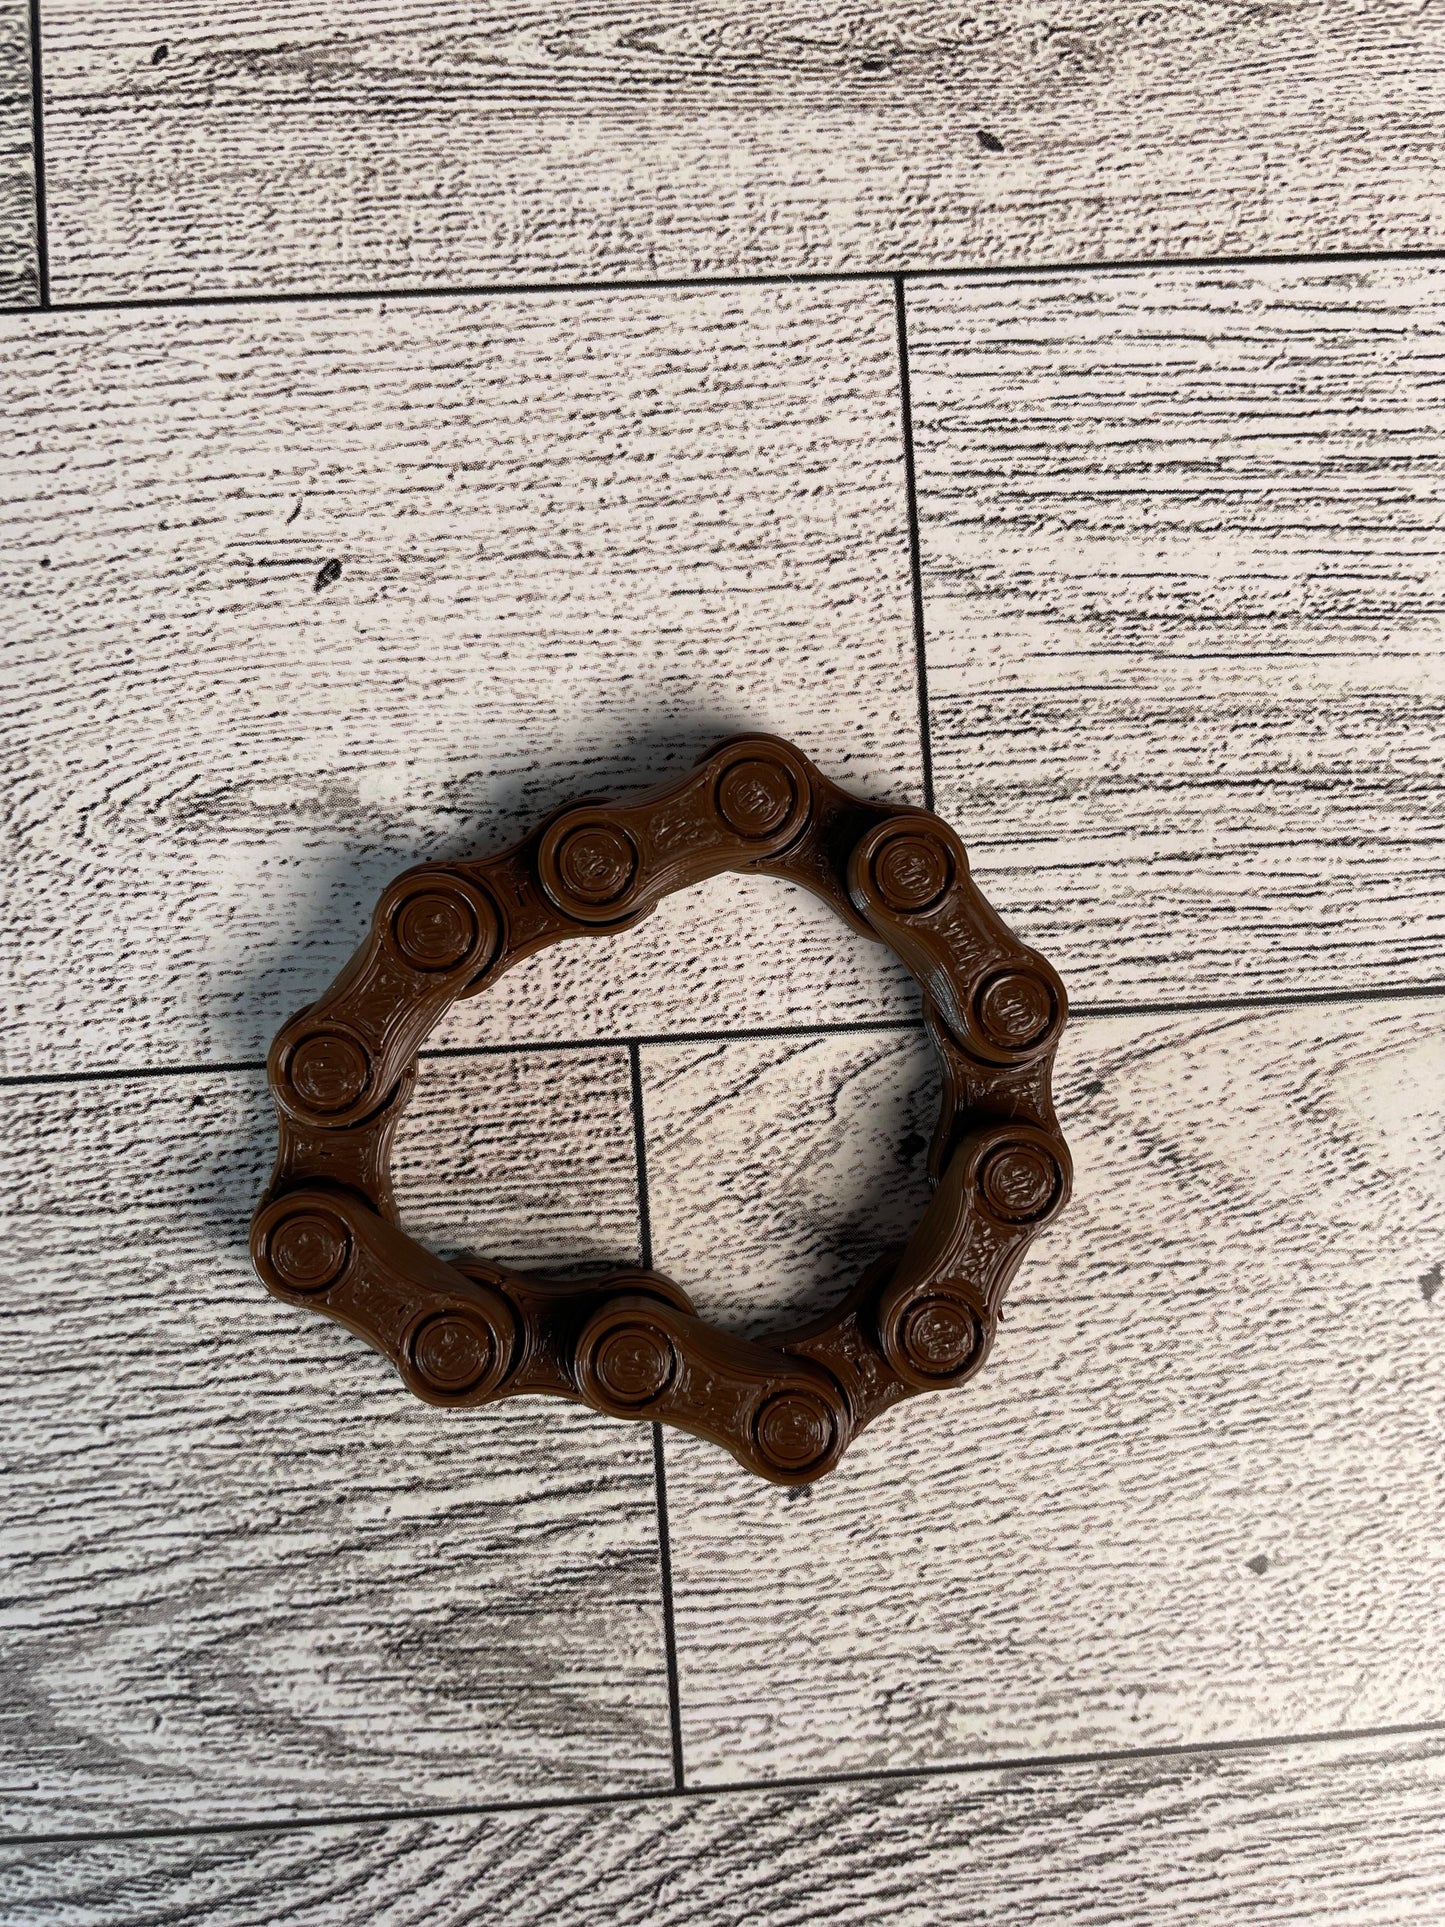 A brown chain link on a wood backdrop. The chain is arranged in a triangle shape and there are six links.